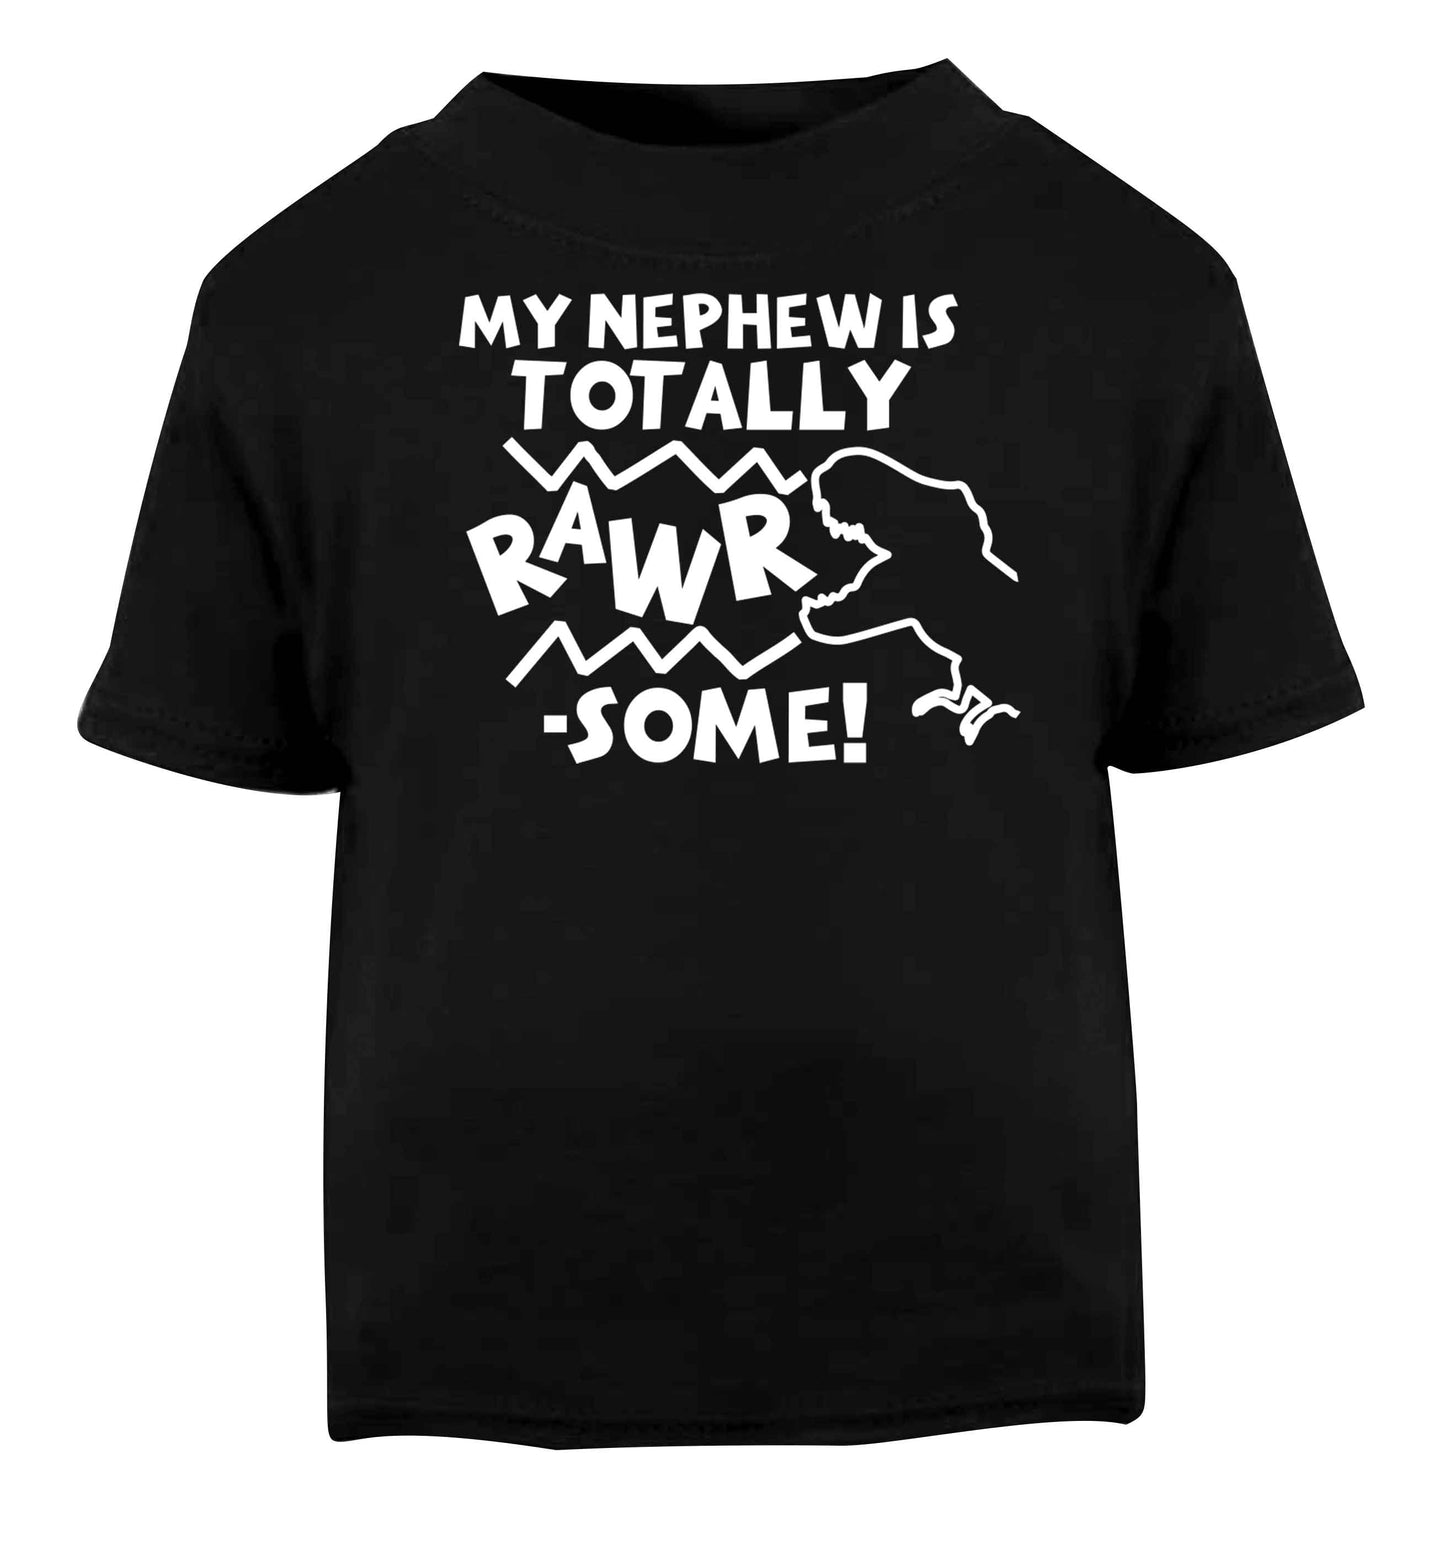 My nephew is totally rawrsome Black baby toddler Tshirt 2 years